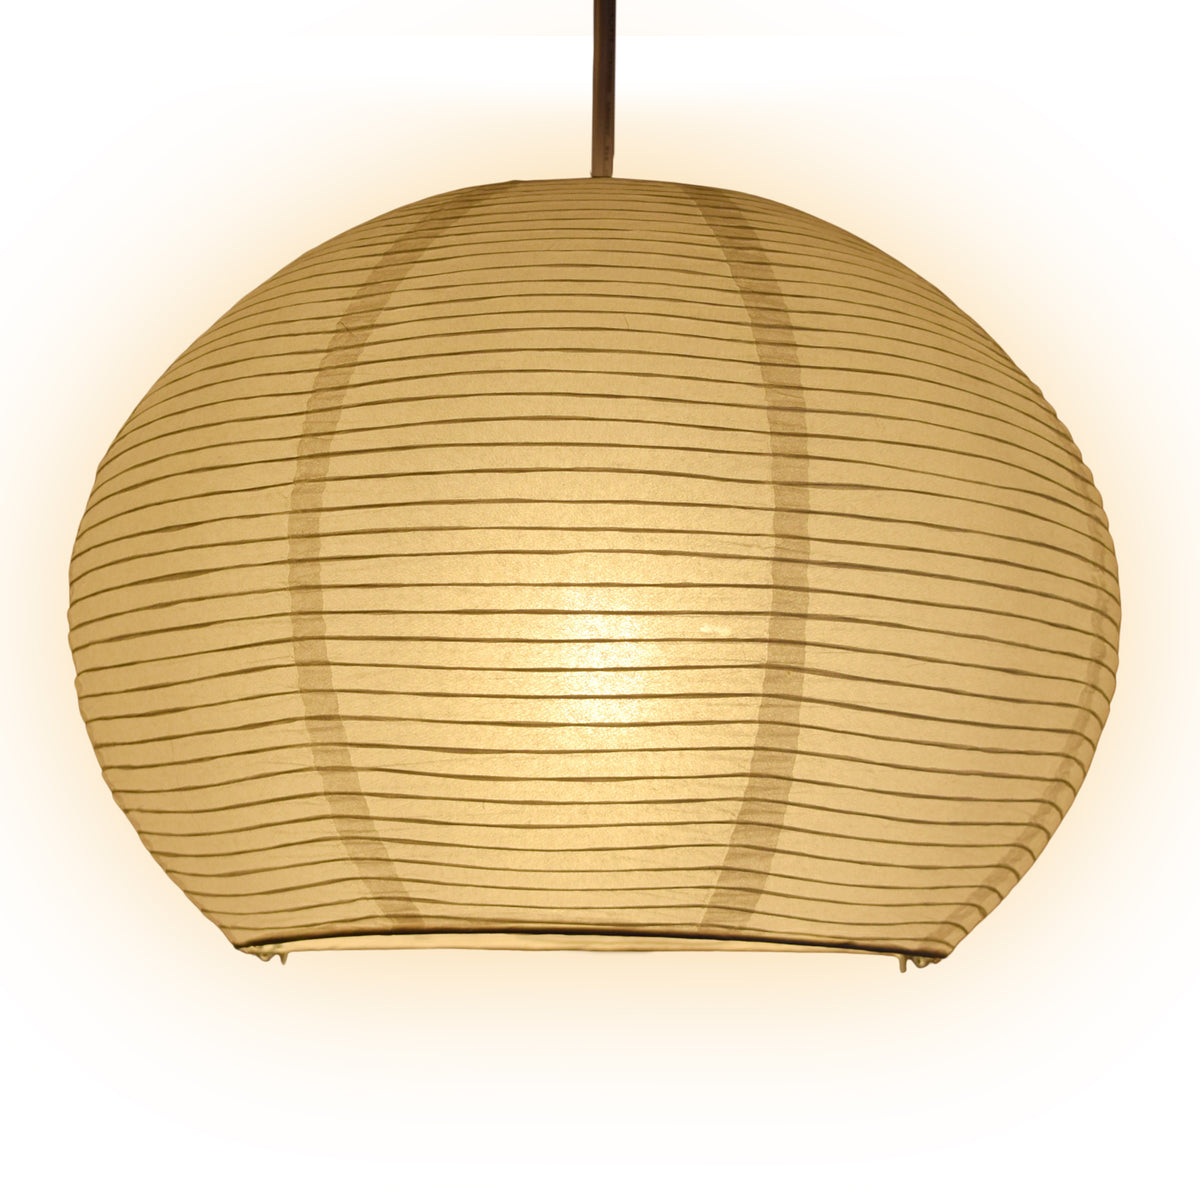 Large Spherical Dome Shaped Premium Fine Line Paper Lantern Lampshade, White (20&quot;W x 15&quot;H)